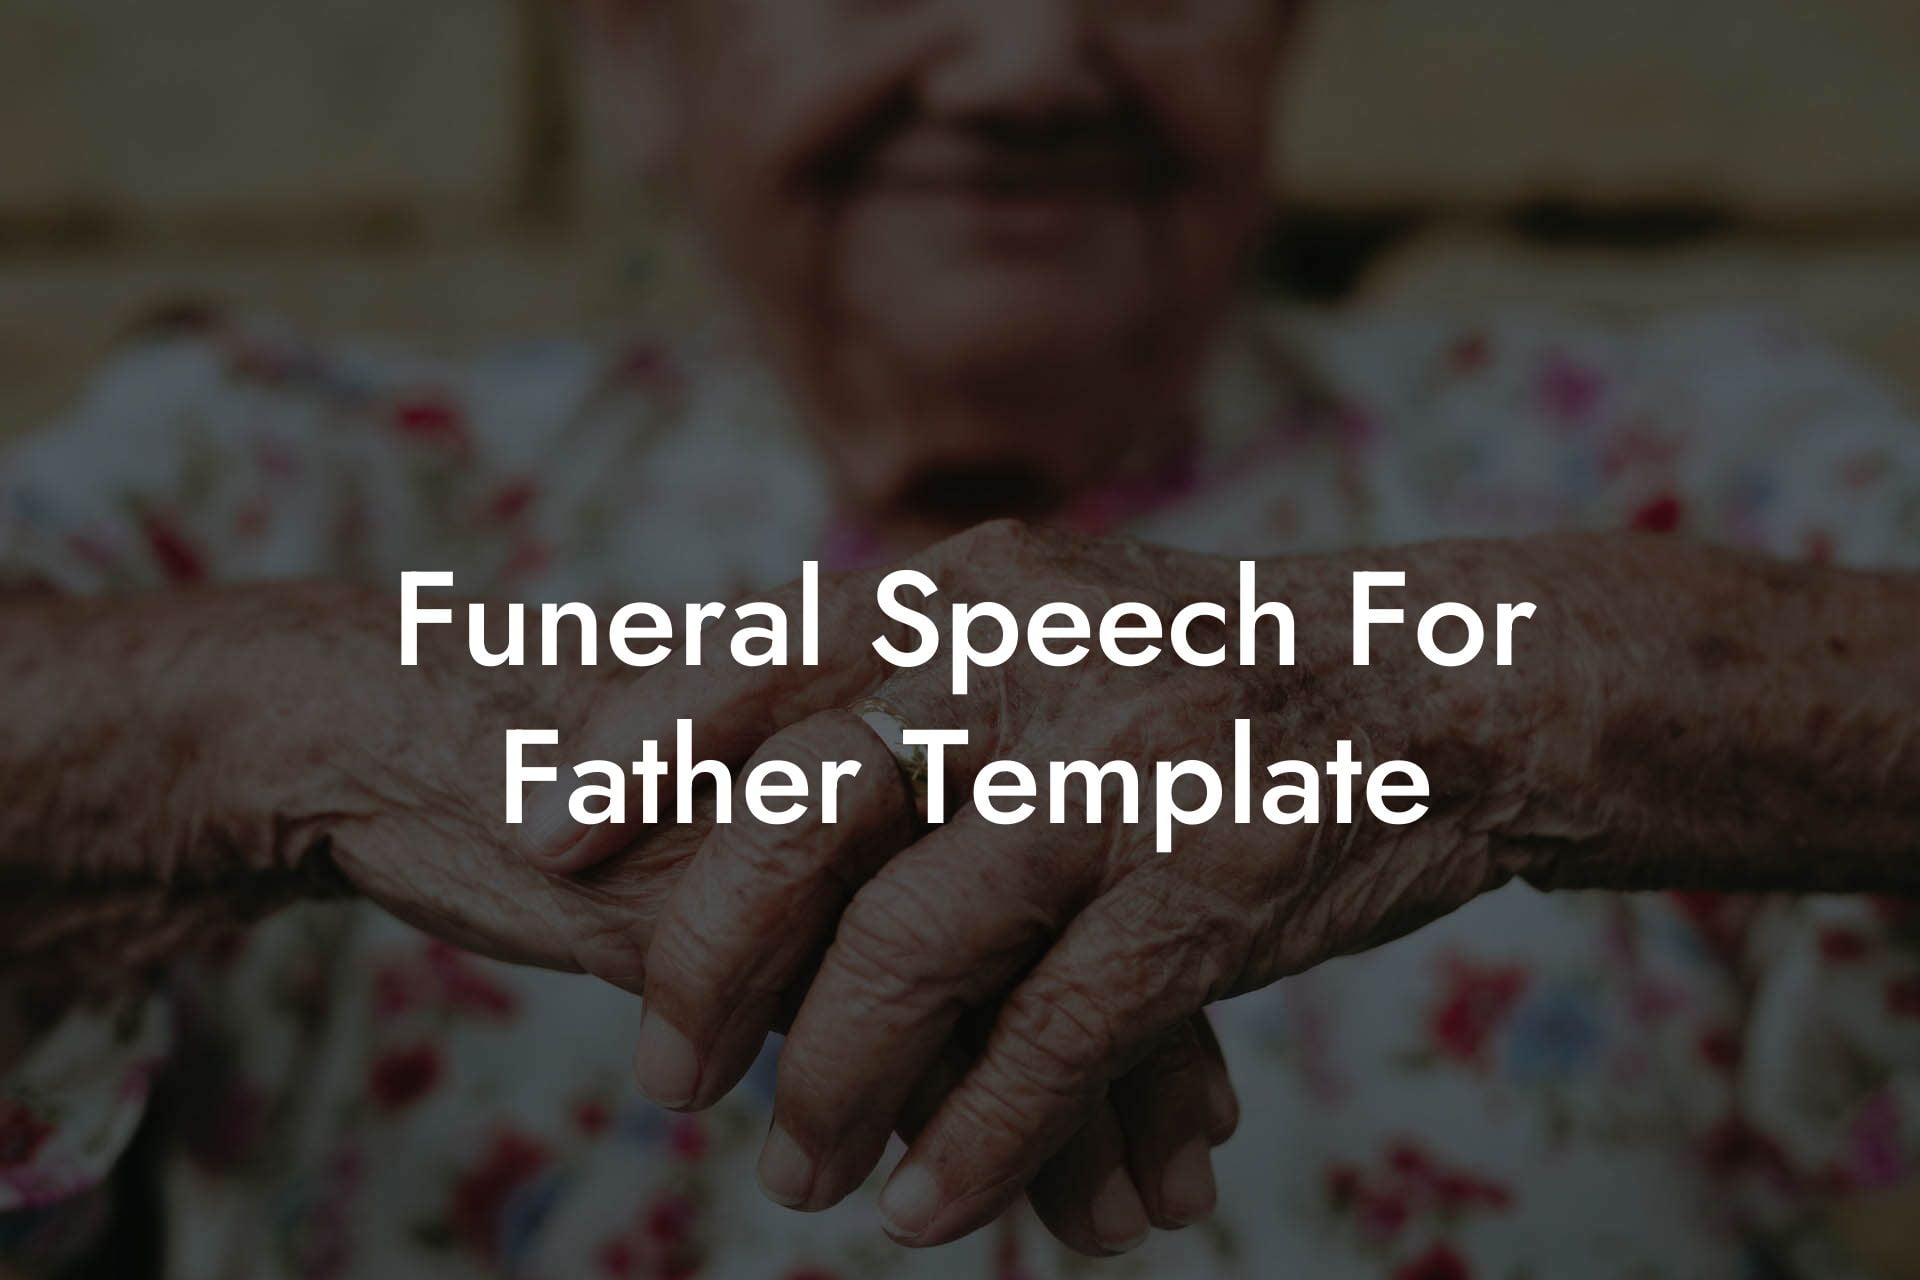 Funeral Speech For Father Template